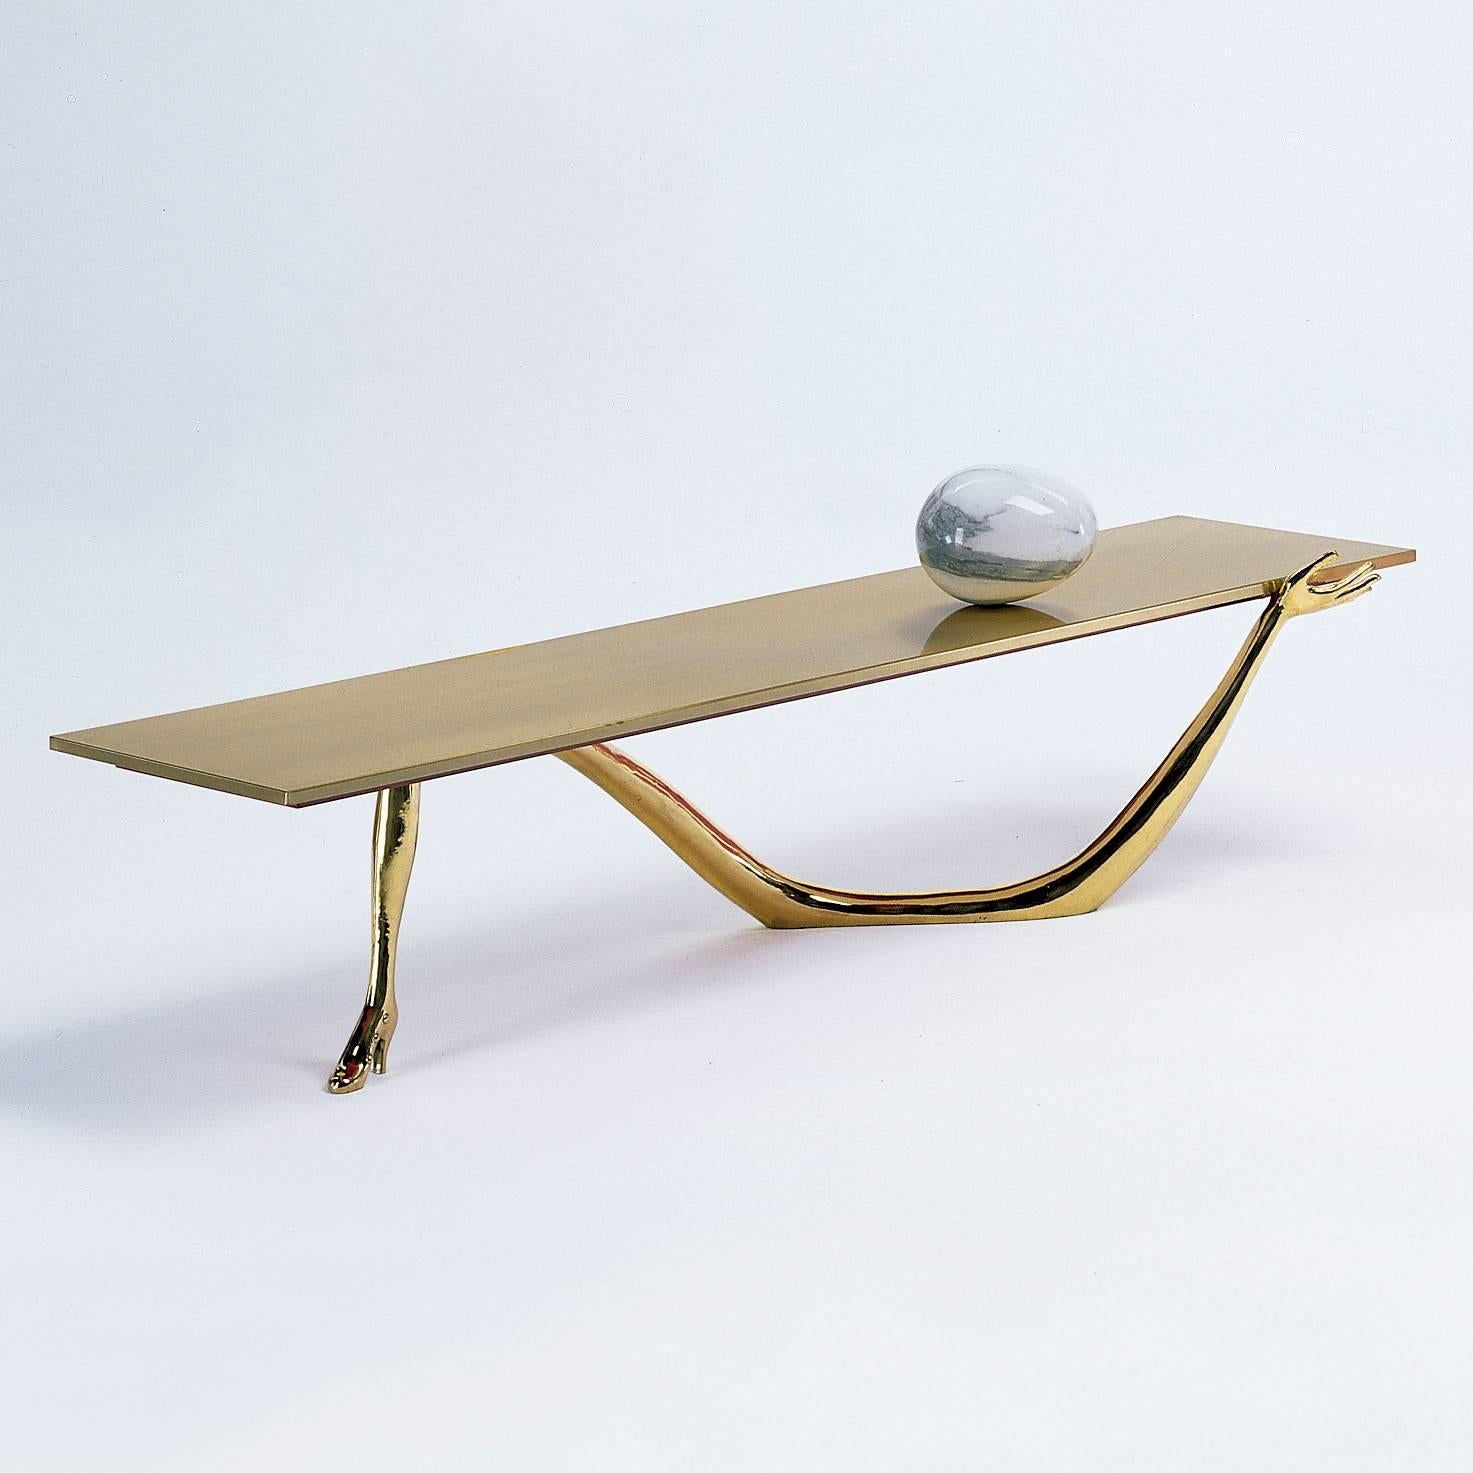 Leda low table designed by Dali manufactured by BD.

Legs are in a cast varnish brass.
Tabletop in brushed and varnished brass.
Carrara marble egg on top.

Measures: 51 x 190 x 61 H cm

During the ‘1930s in Paris, Salvador Dalí surrounded himself